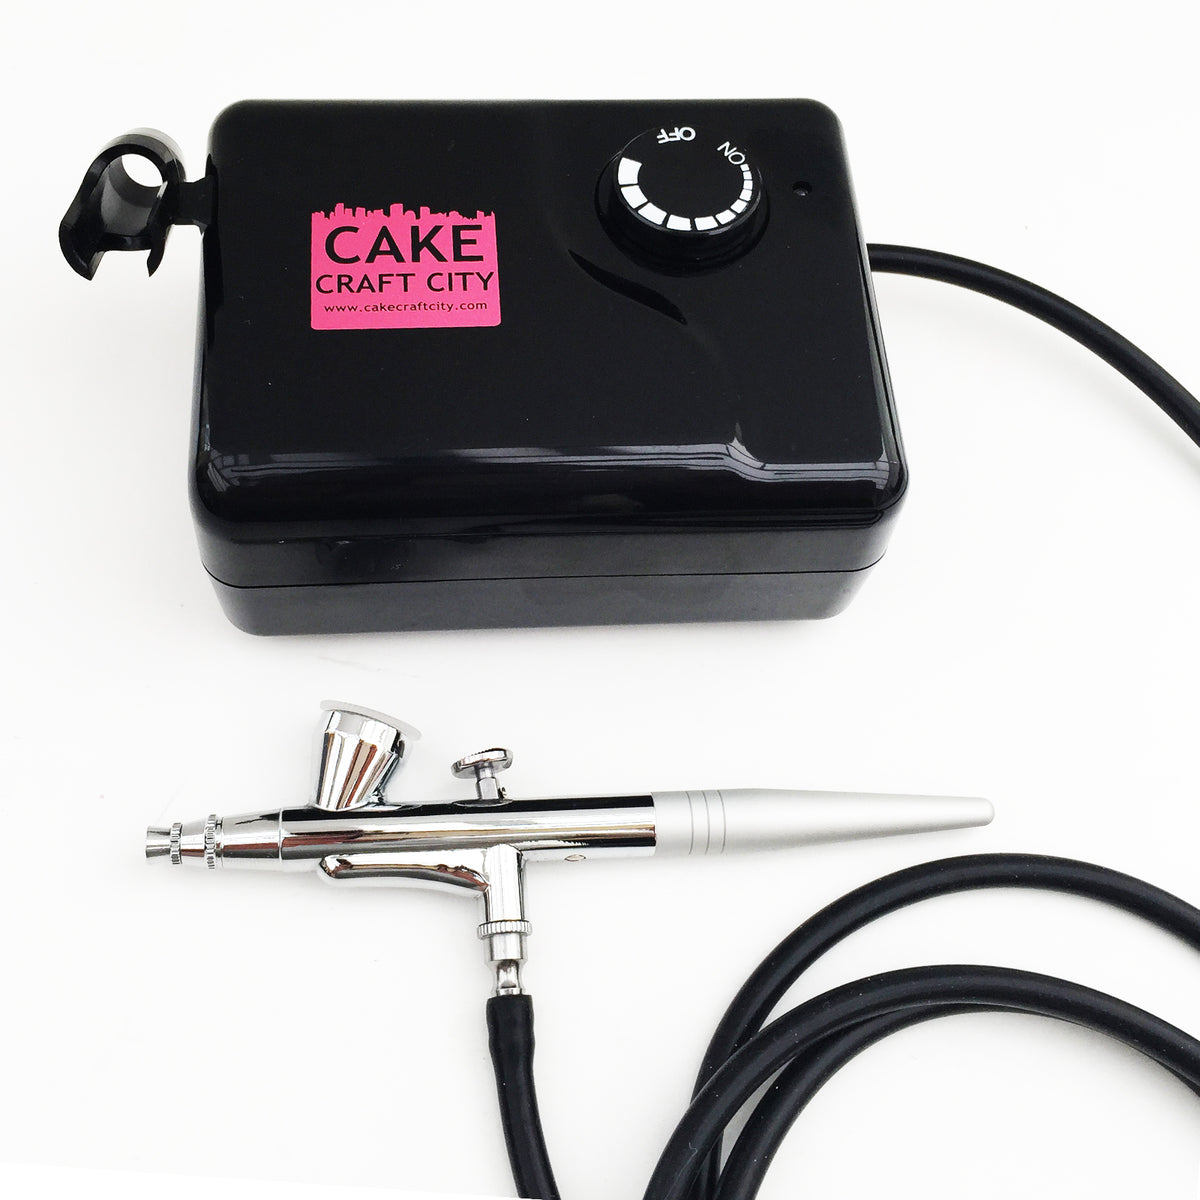 Cake Airbrush Decorating Kit with Compressor: Futebo Cookie Airbrush Kit  with 8 Vivid Airbrush Metallic Food Colors, Decorate Cakes, Desserts or  Other